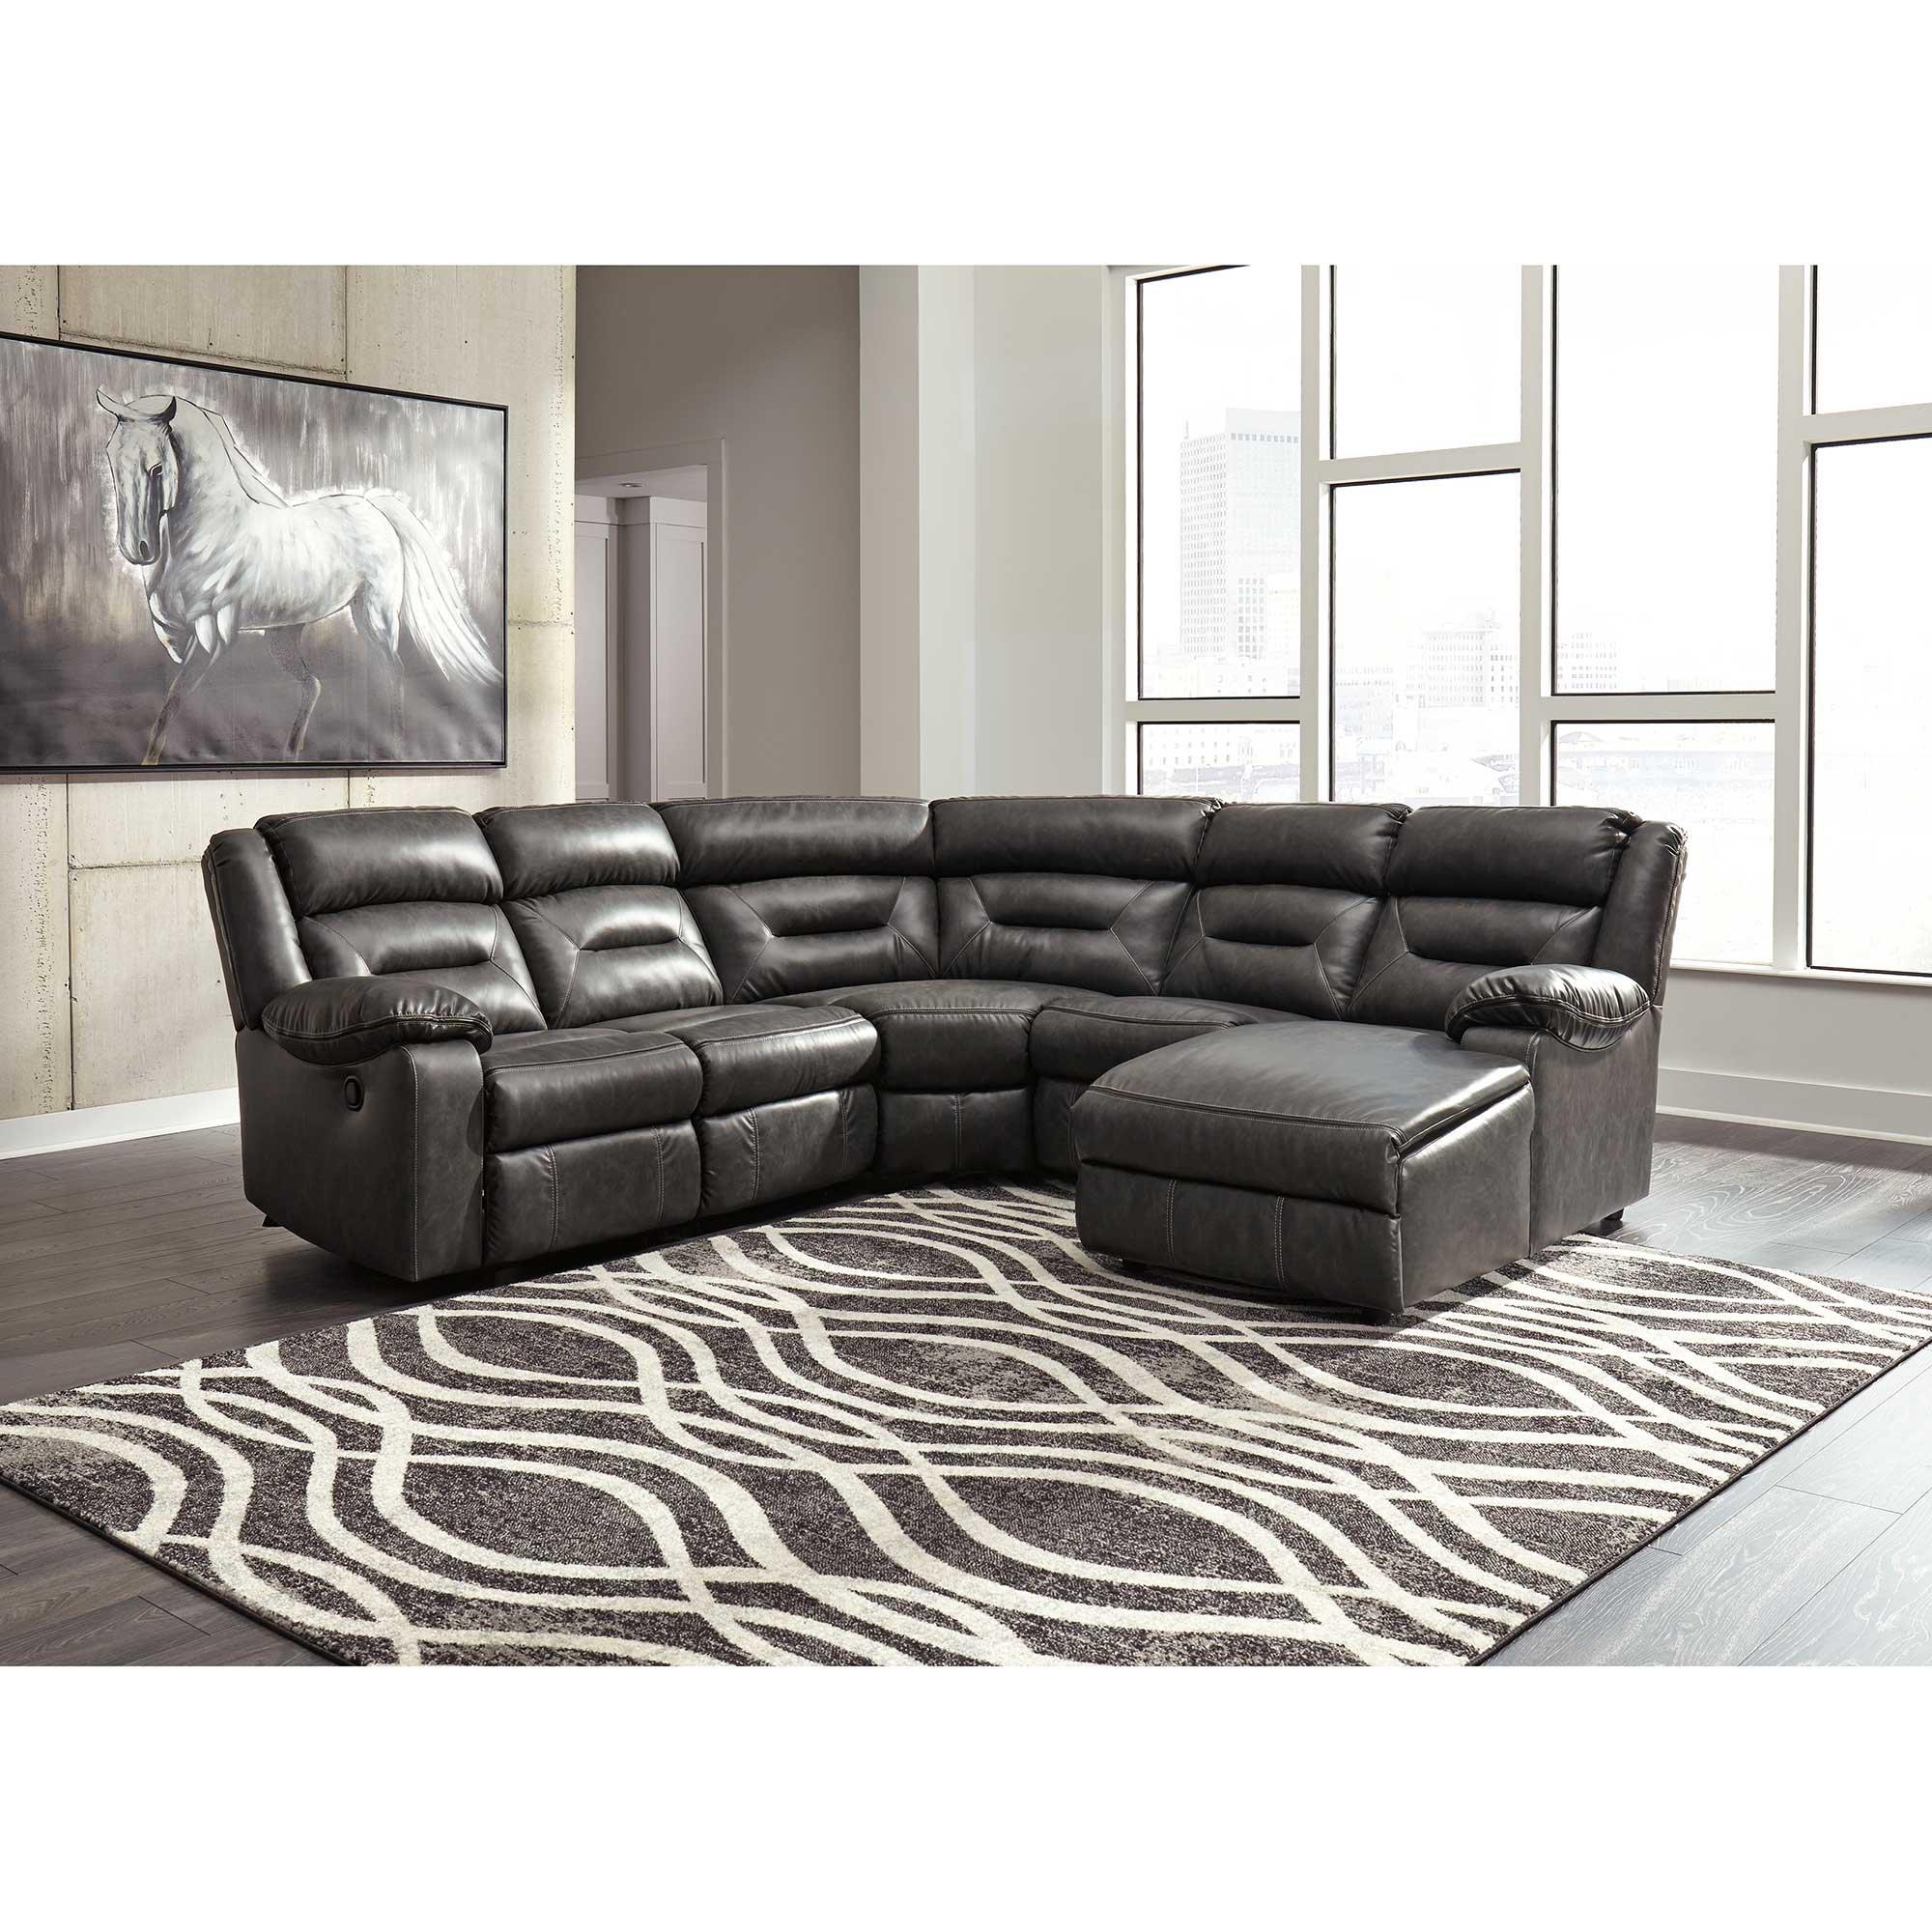 Featured image of post Ashley Furniture 5 Piece Living Room Set : Coffee tables+tv stands+2 pieces of living room cabinets.